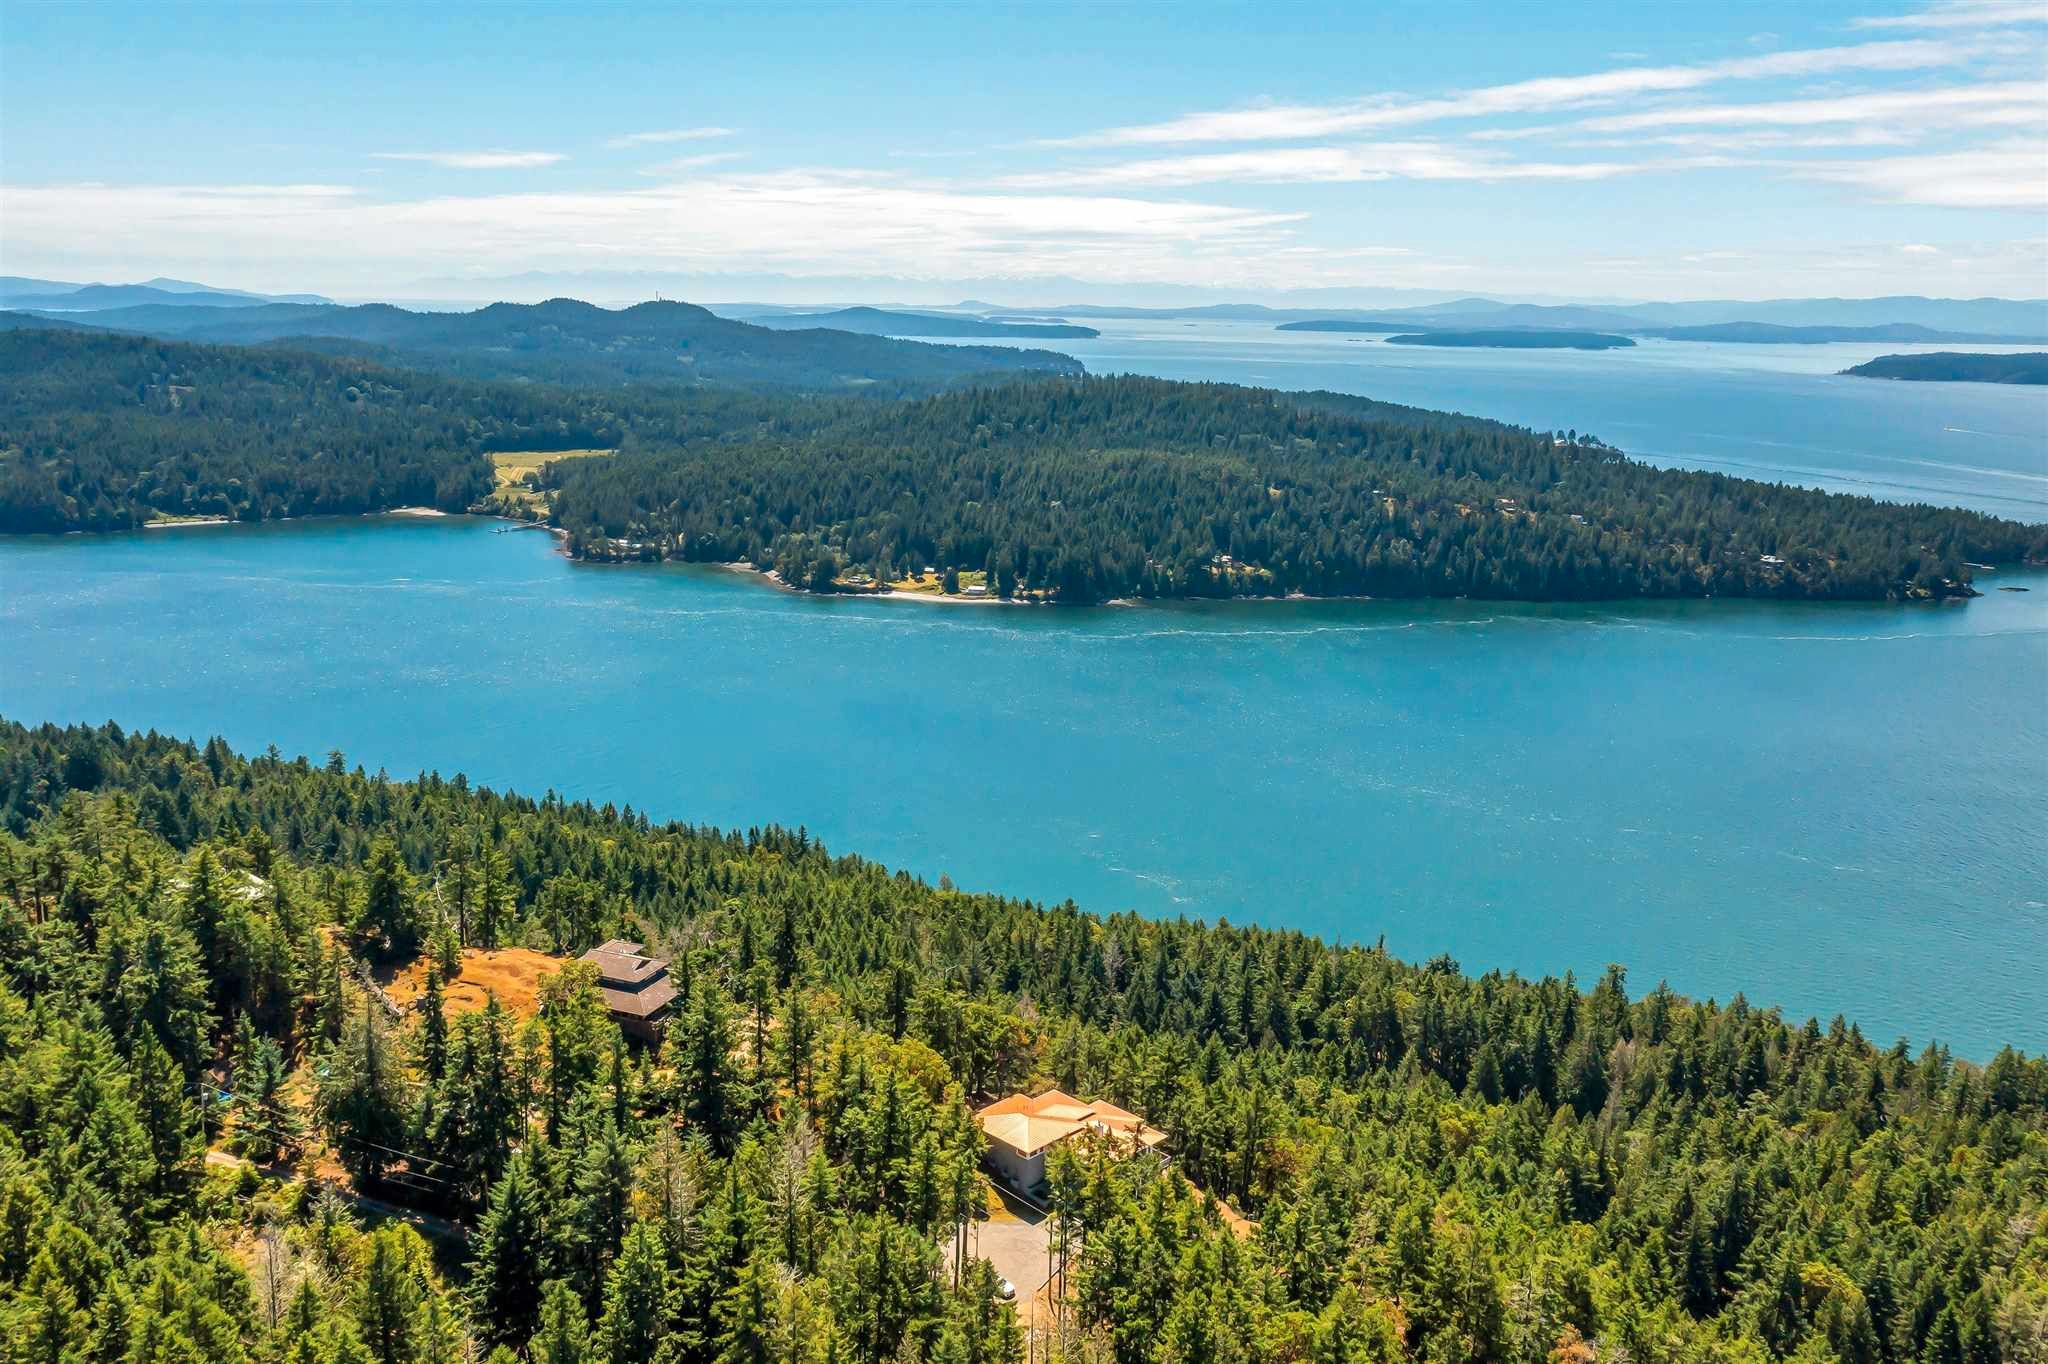 Main Photo: 356 EAST WEST ROAD in : Mayne Island House for sale : MLS®# R2596580